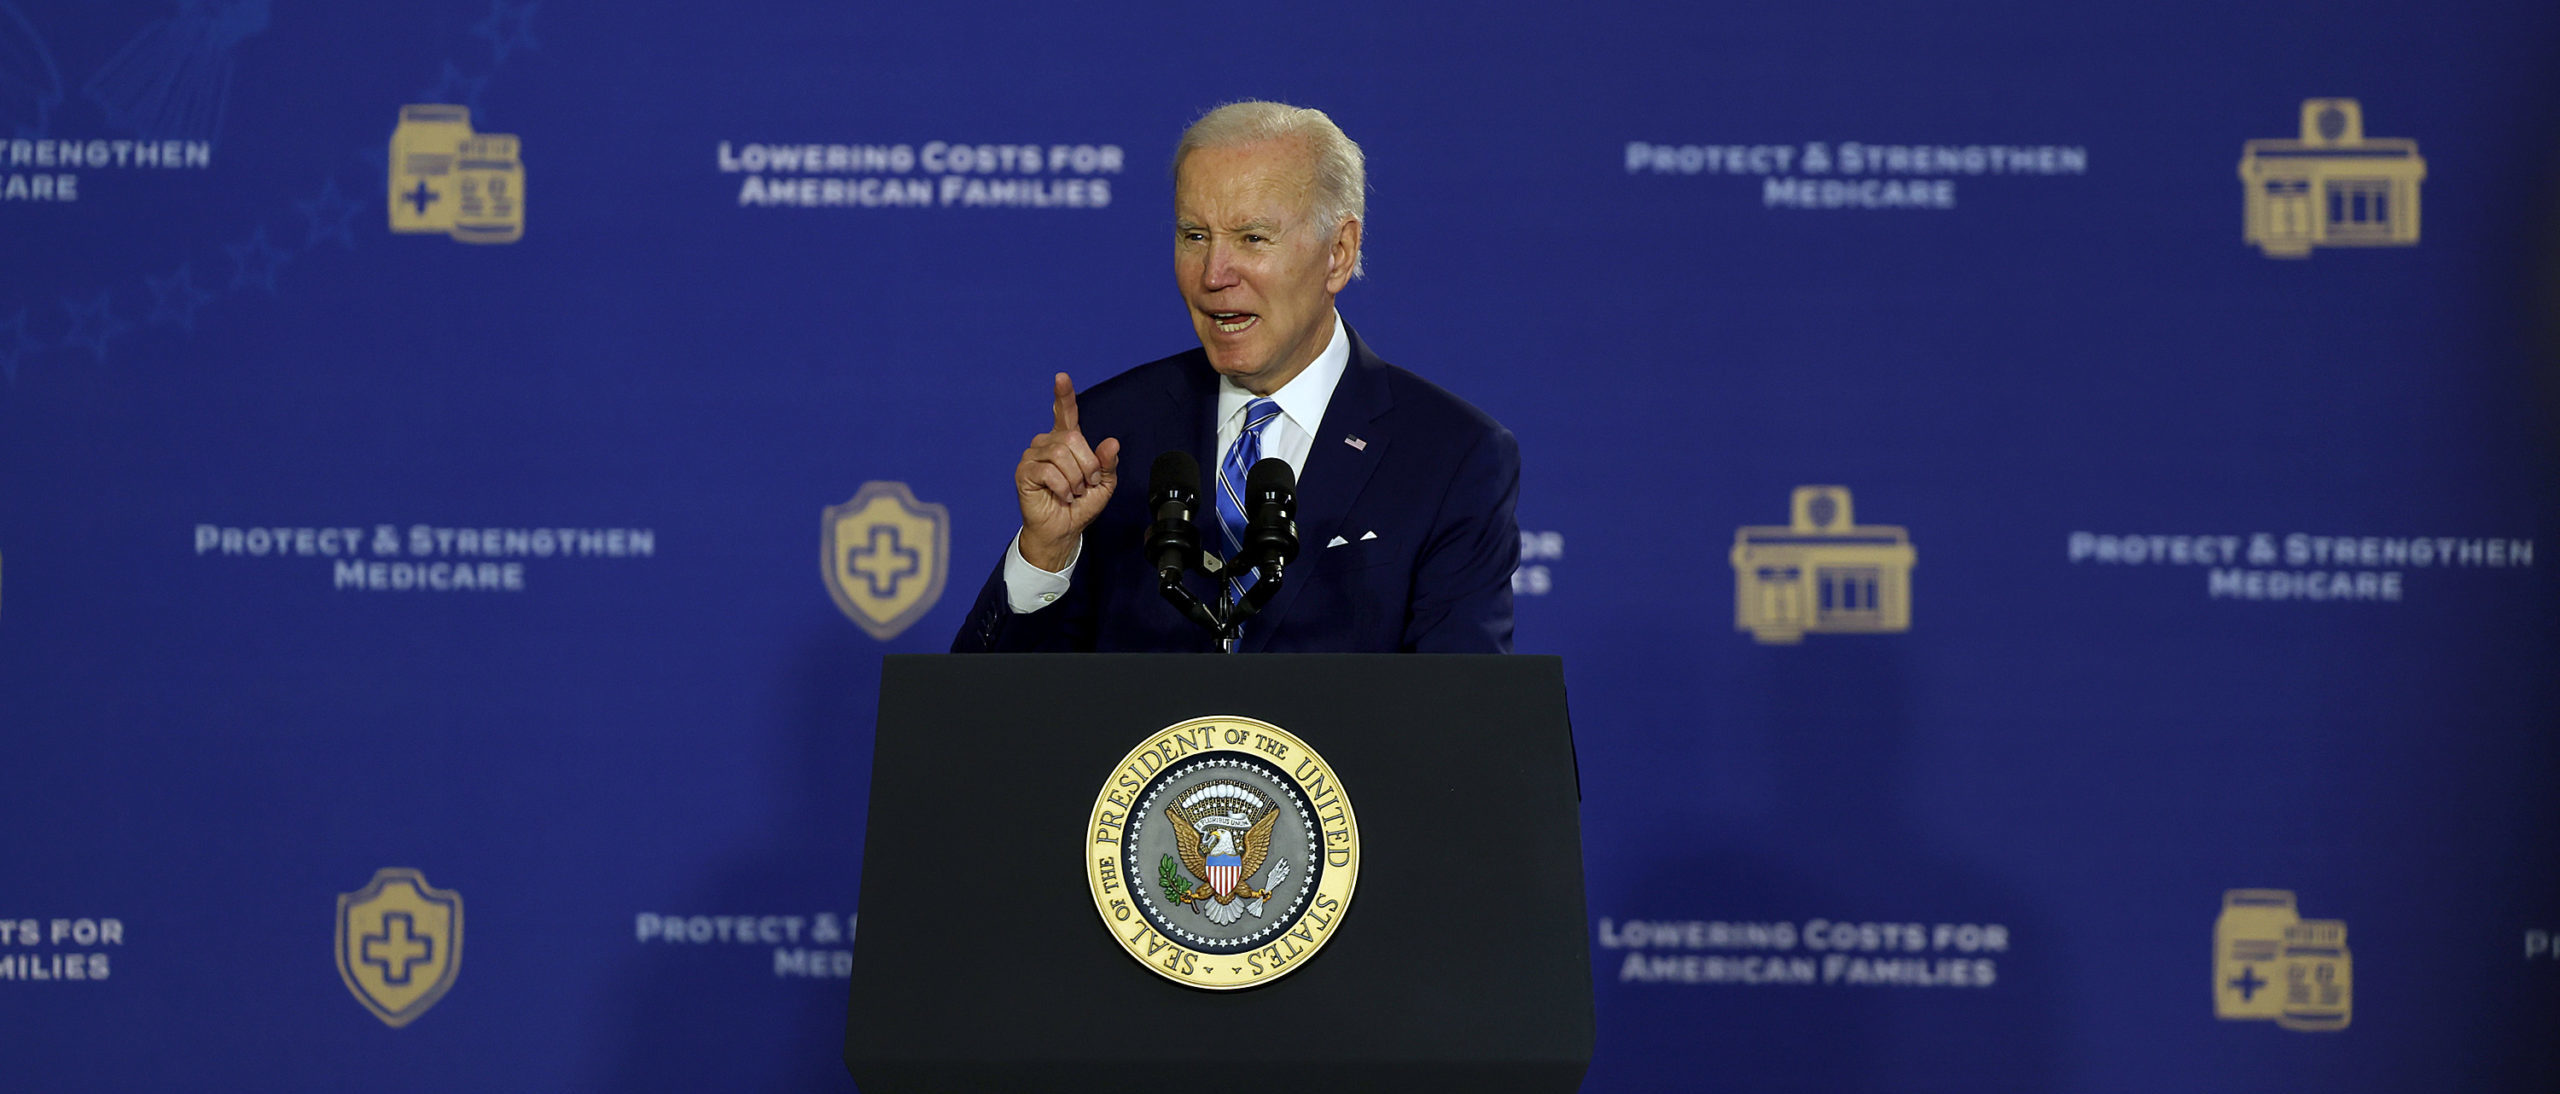 GINN: Healthcare Costs Are Straining Federal And Household Budgets. Here’s How Biden Can Rein Them In